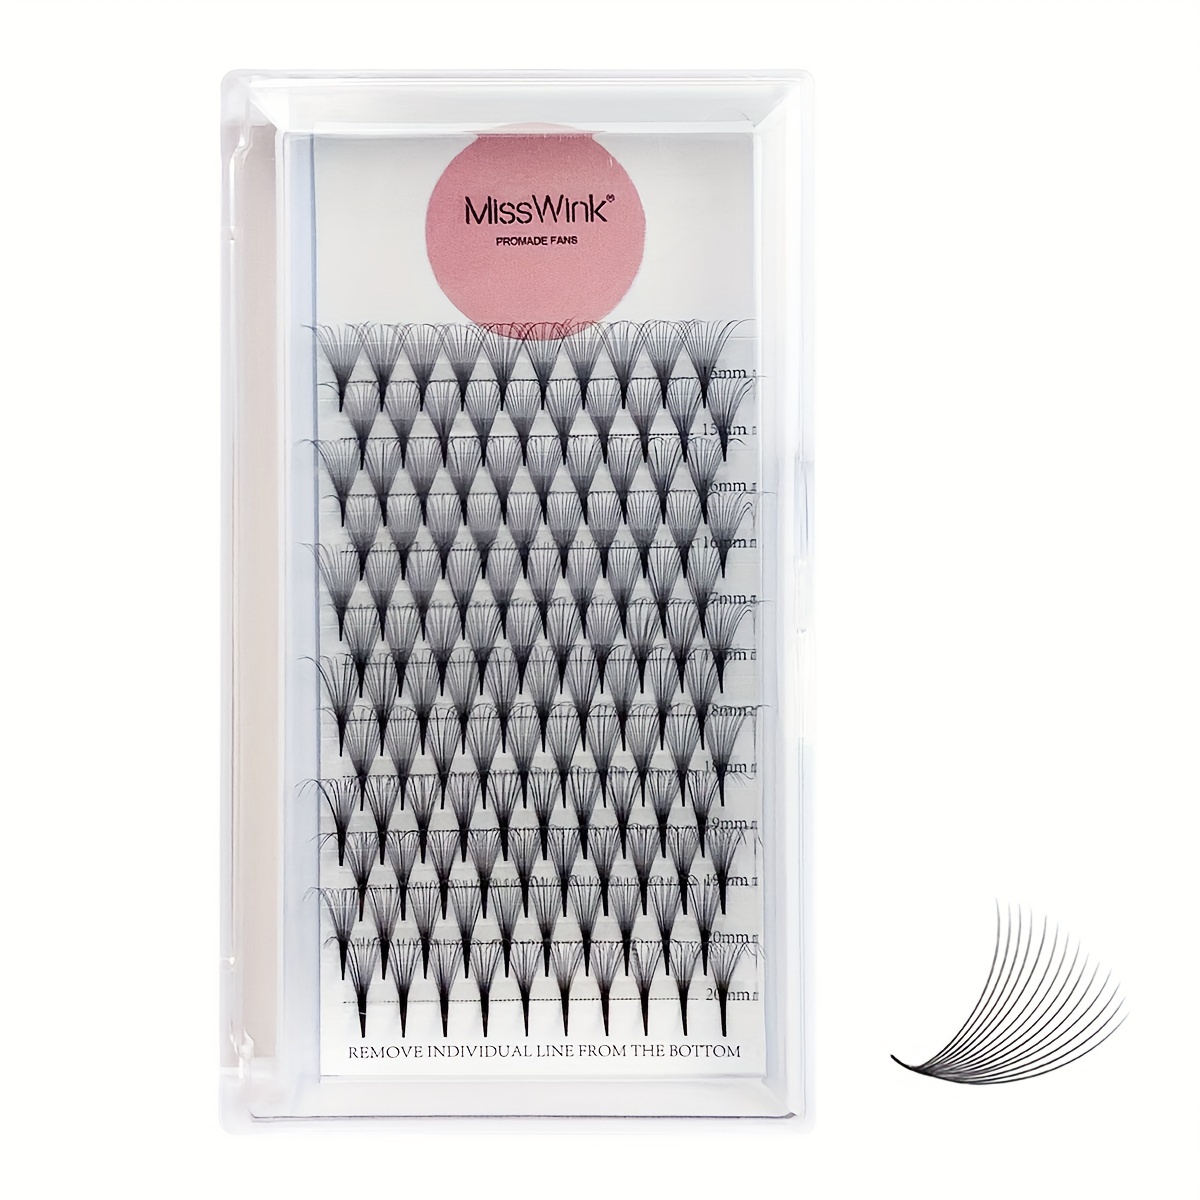 

14d 15-20mm Fans Lashes Long Stem Pointed Base 120pcs 12 Rows Mixed Premade Fans Packaging Small And Portable Curling Self Grafting Eyelashes Suitable For Daily Makeup And Outing Party Makeup